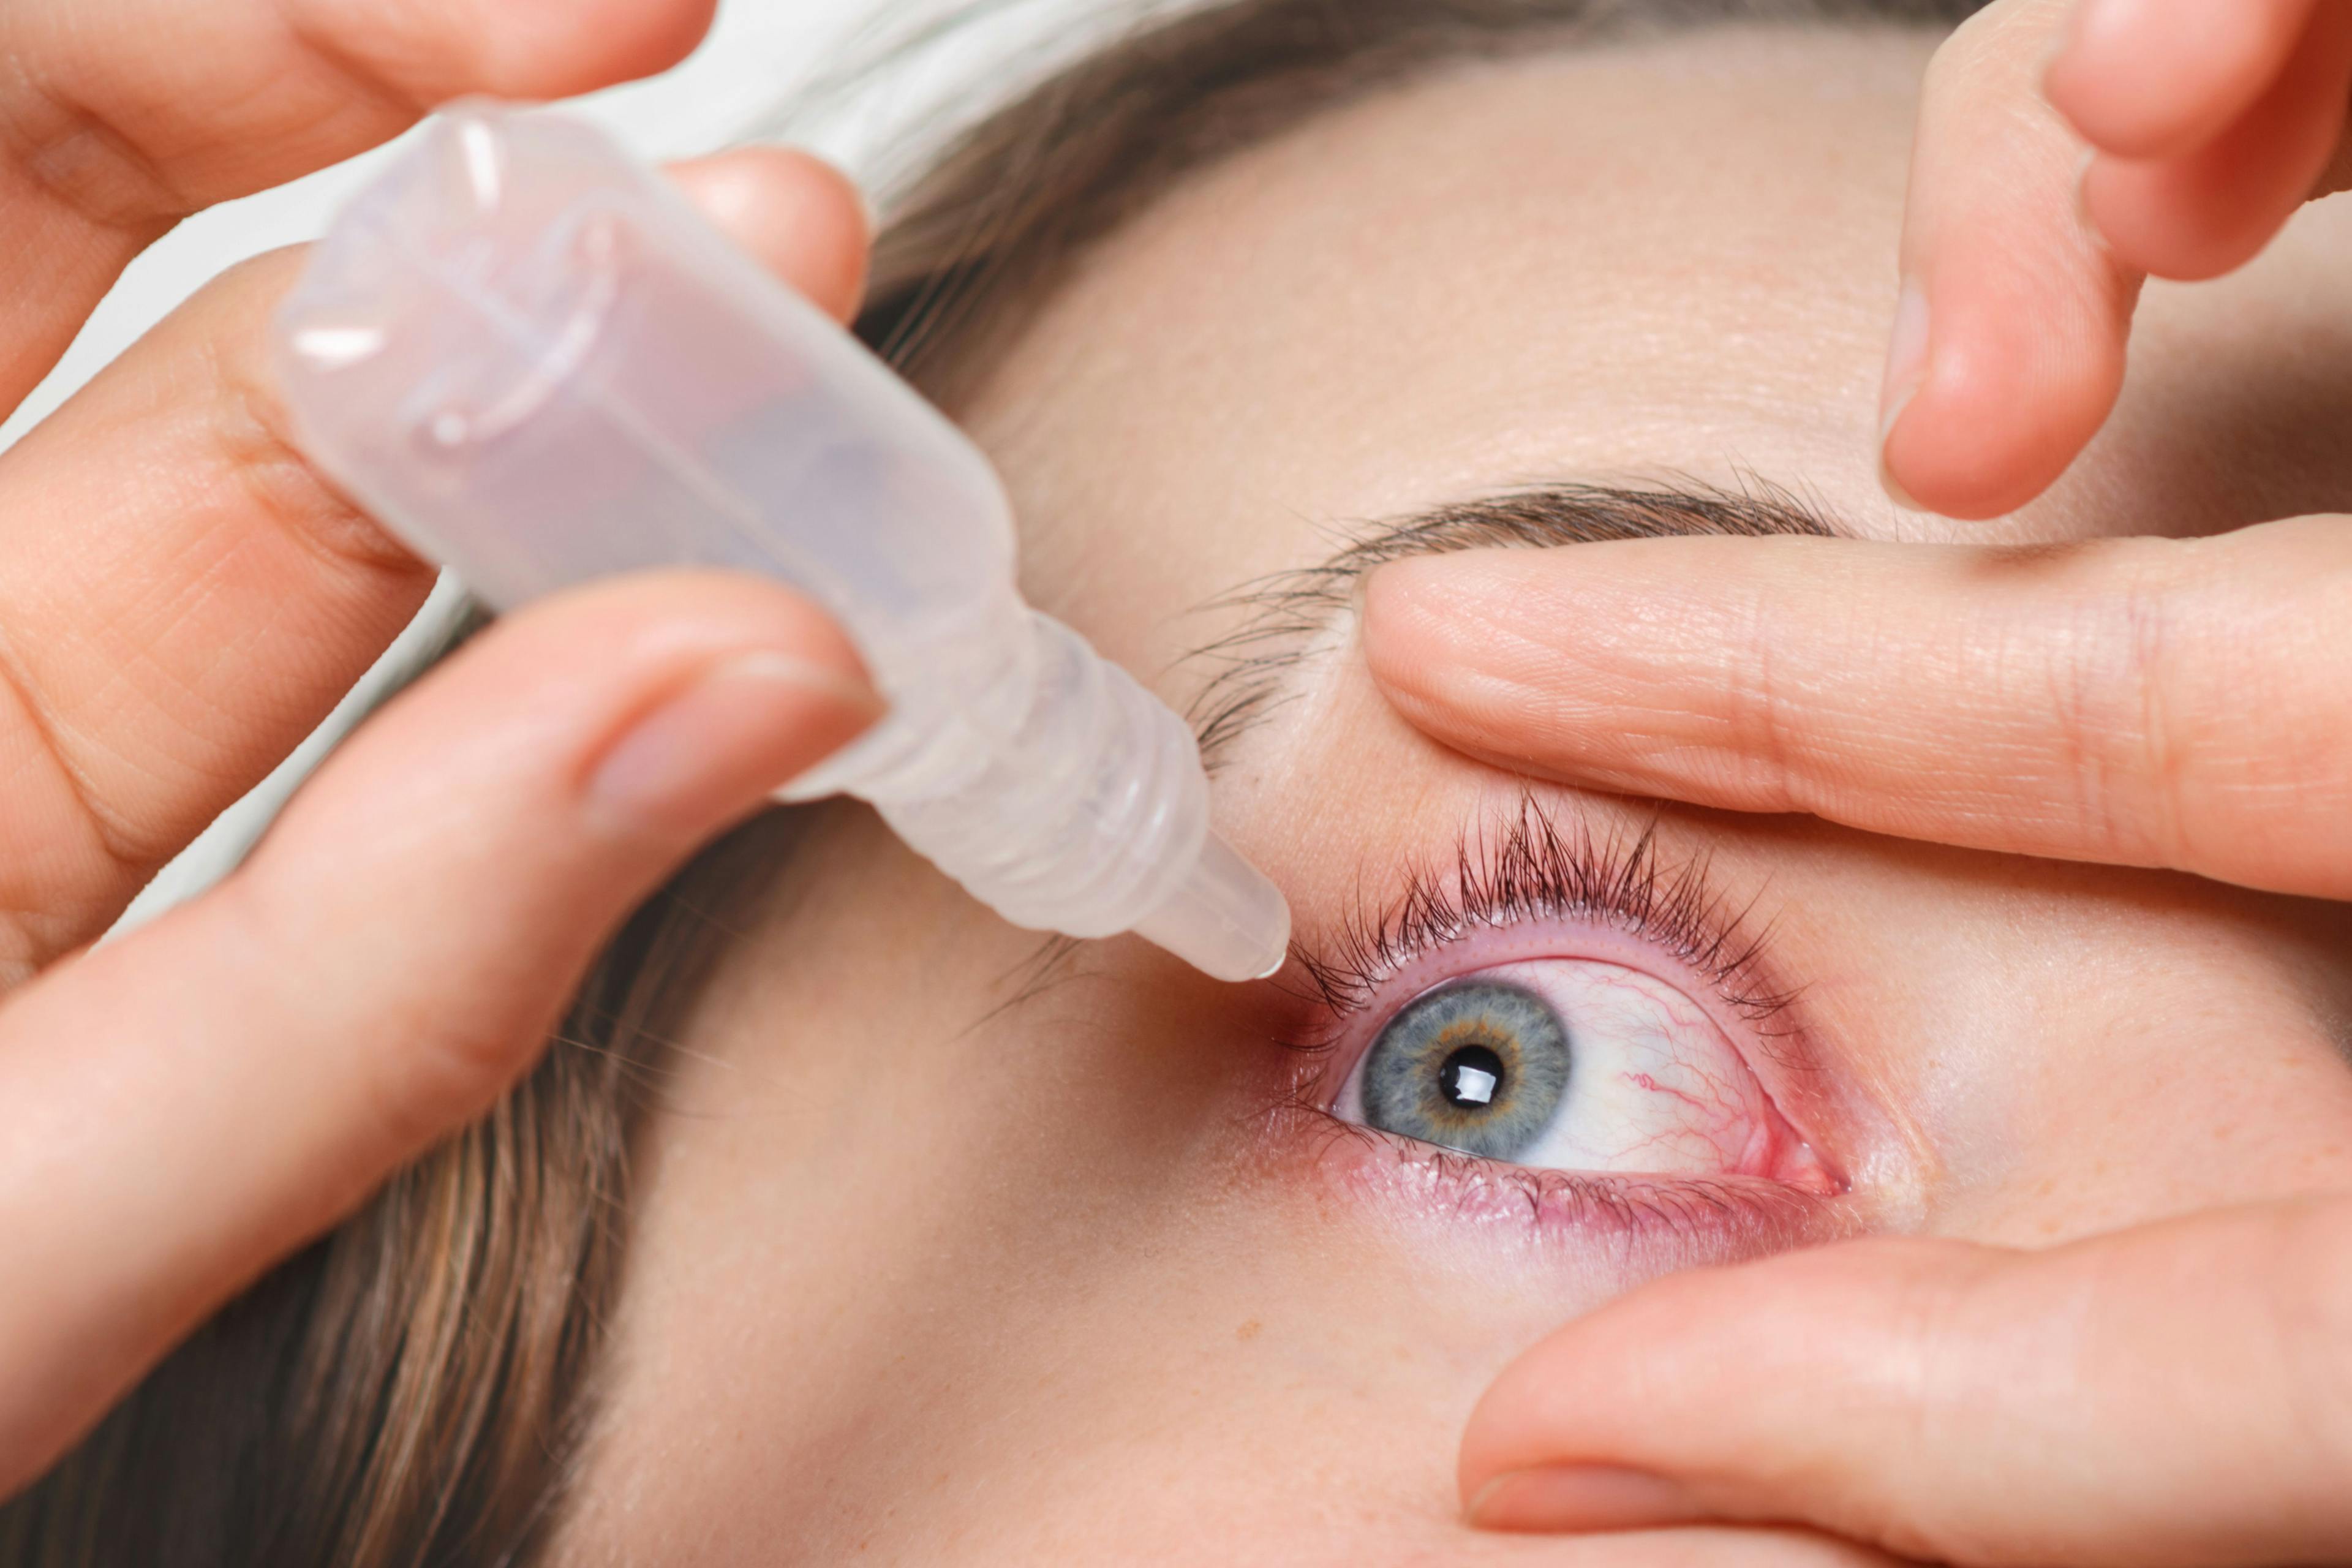 Glaucoma drugs and drug delivery: Arising from the pandemic